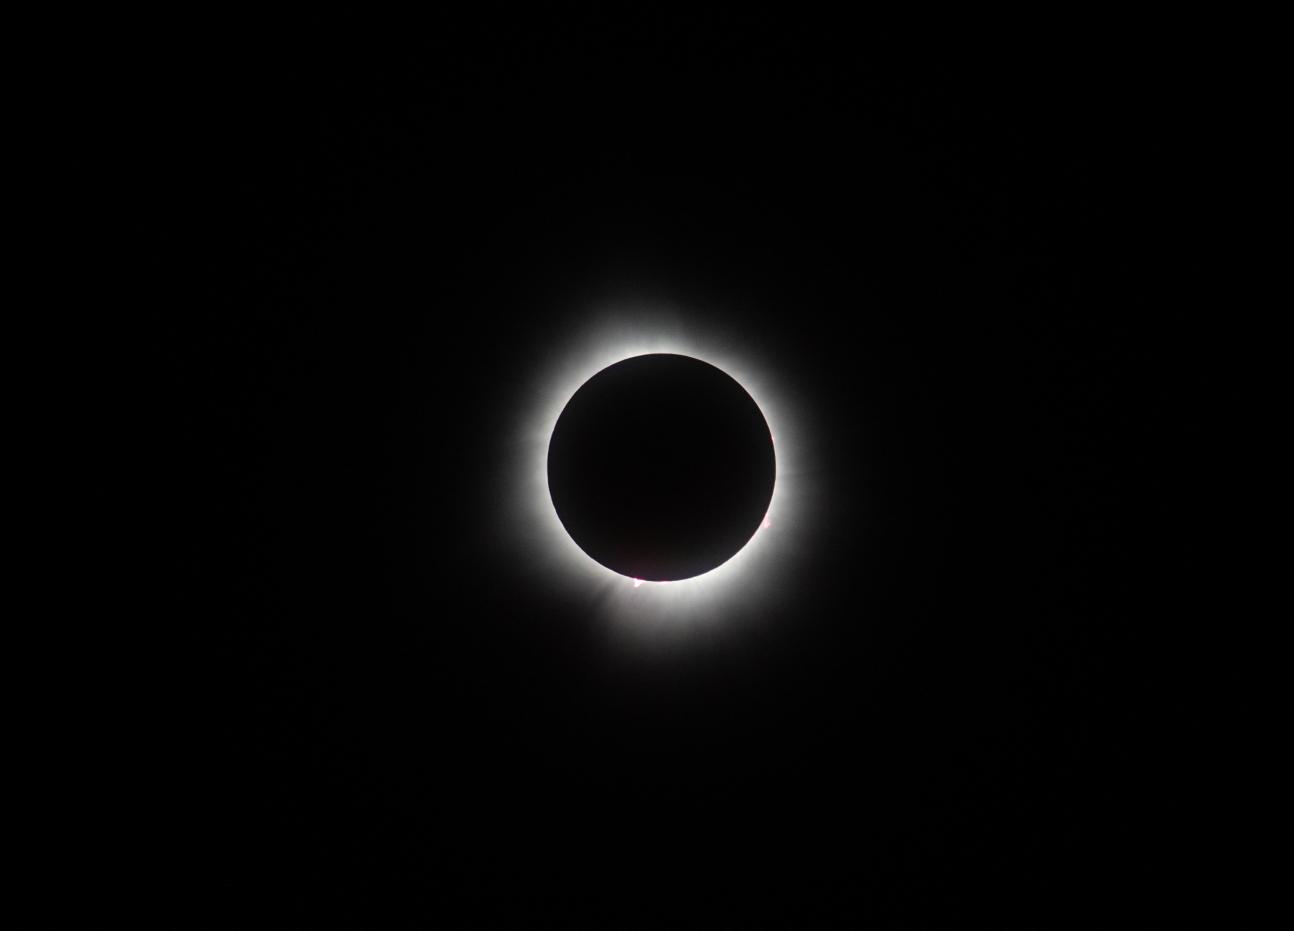 WAPAKONETA, OHIO - APRIL 8: The sun and the moon align completely, with solar prominences visible, during the total solar eclipse on April 8, 2024 in Wapakoneta, Ohio. Totality lasted for alomst four minutes in Ohio. Millions of people have flocked to areas across North America that are in the 